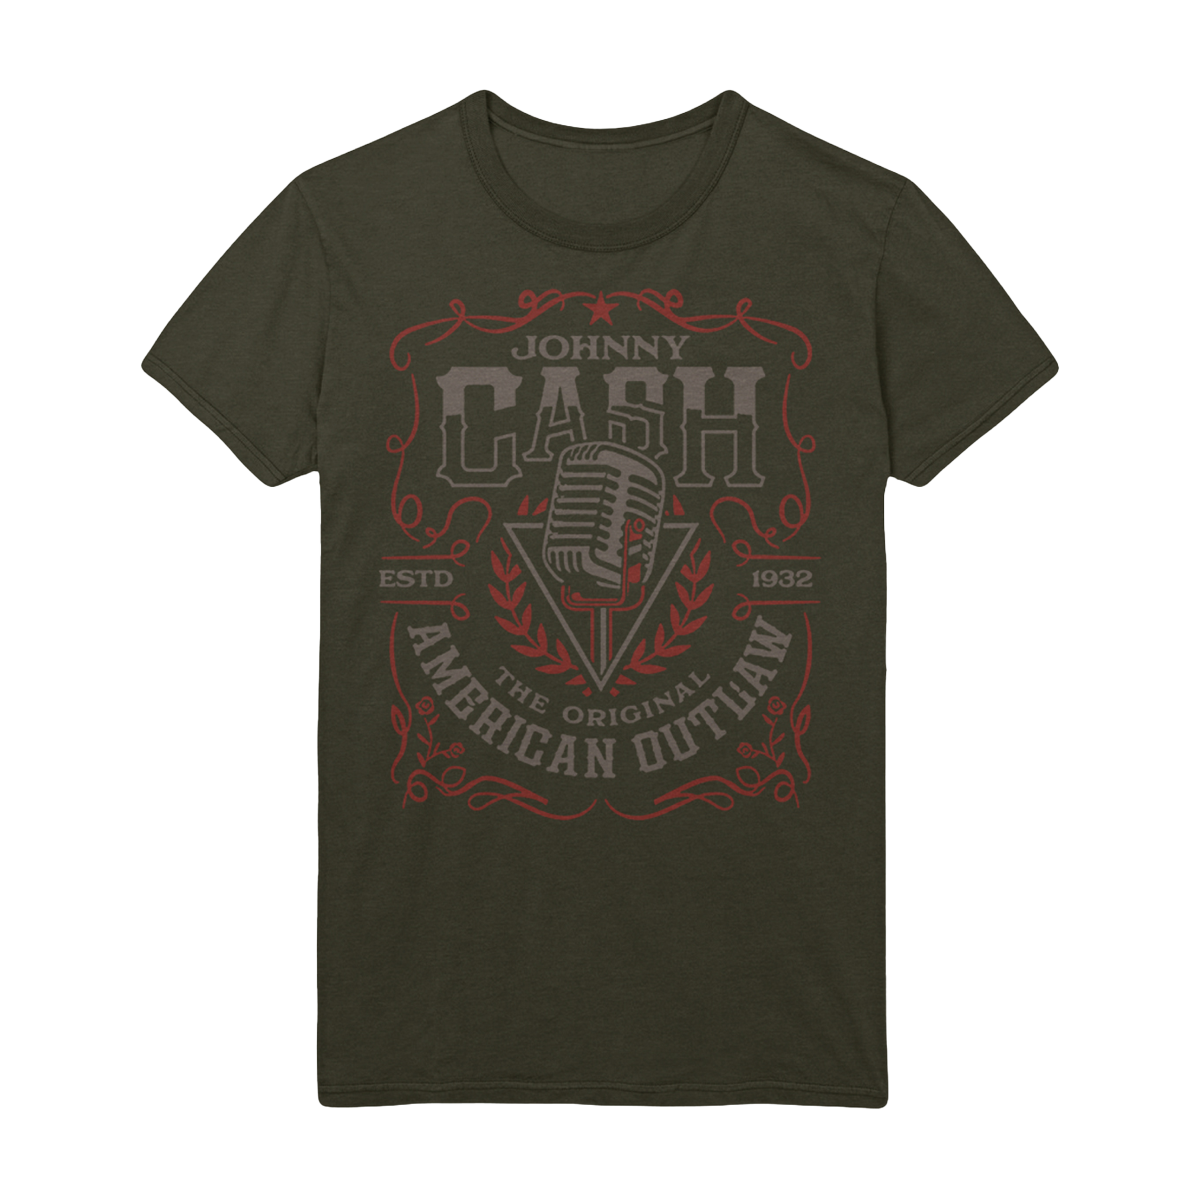 JOHNNY CASH AMERICAN OUTLAW MICROPHONE T-SHIRT